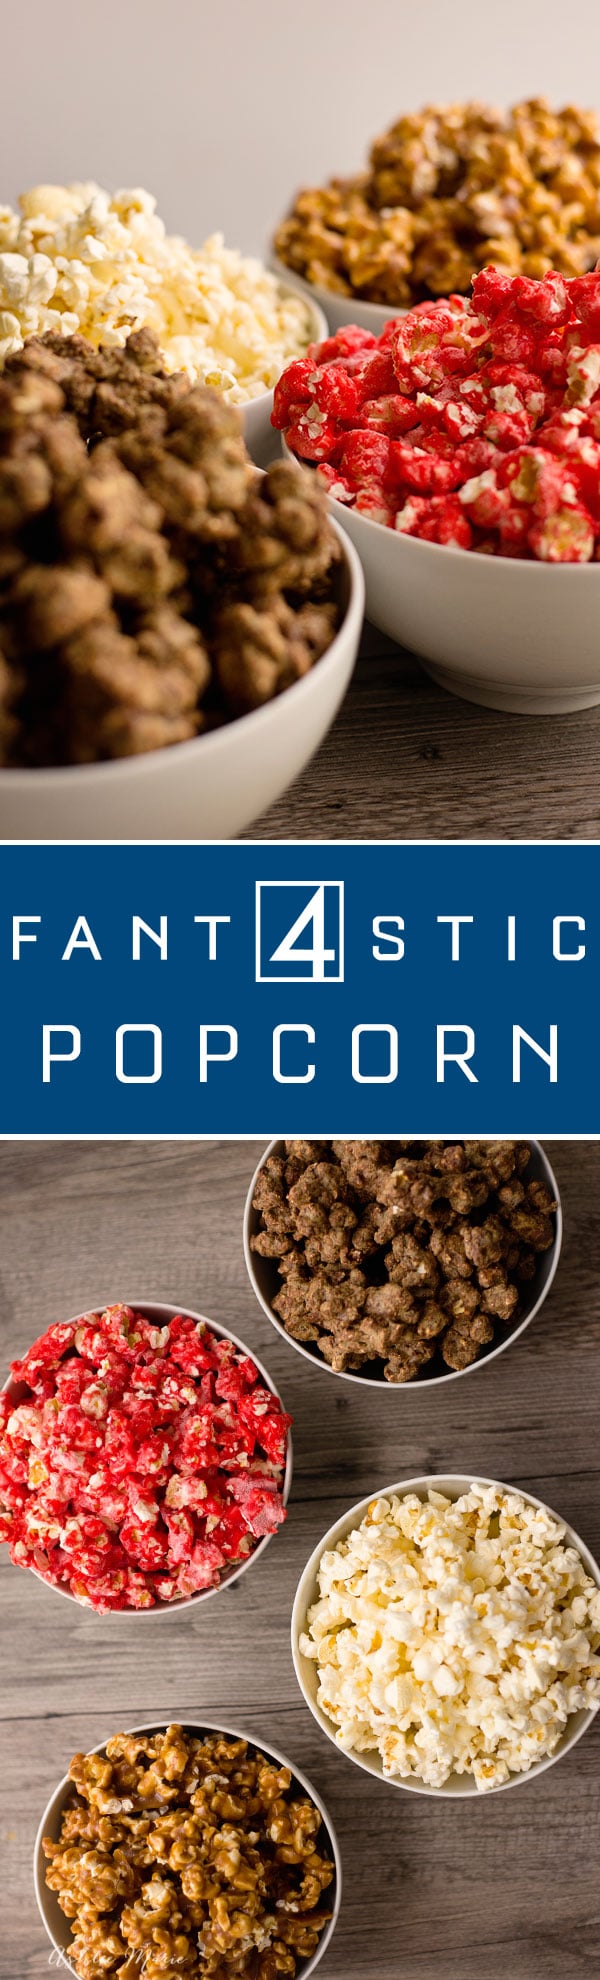 4 different types of popcorn to go along with the new fantastic 4 movie. Stretchy Caramel popcorn, simple and sweet Kettle Corn, Fiery Red Hot Candied Popcorn and Rocky Puppy Chow popcorn